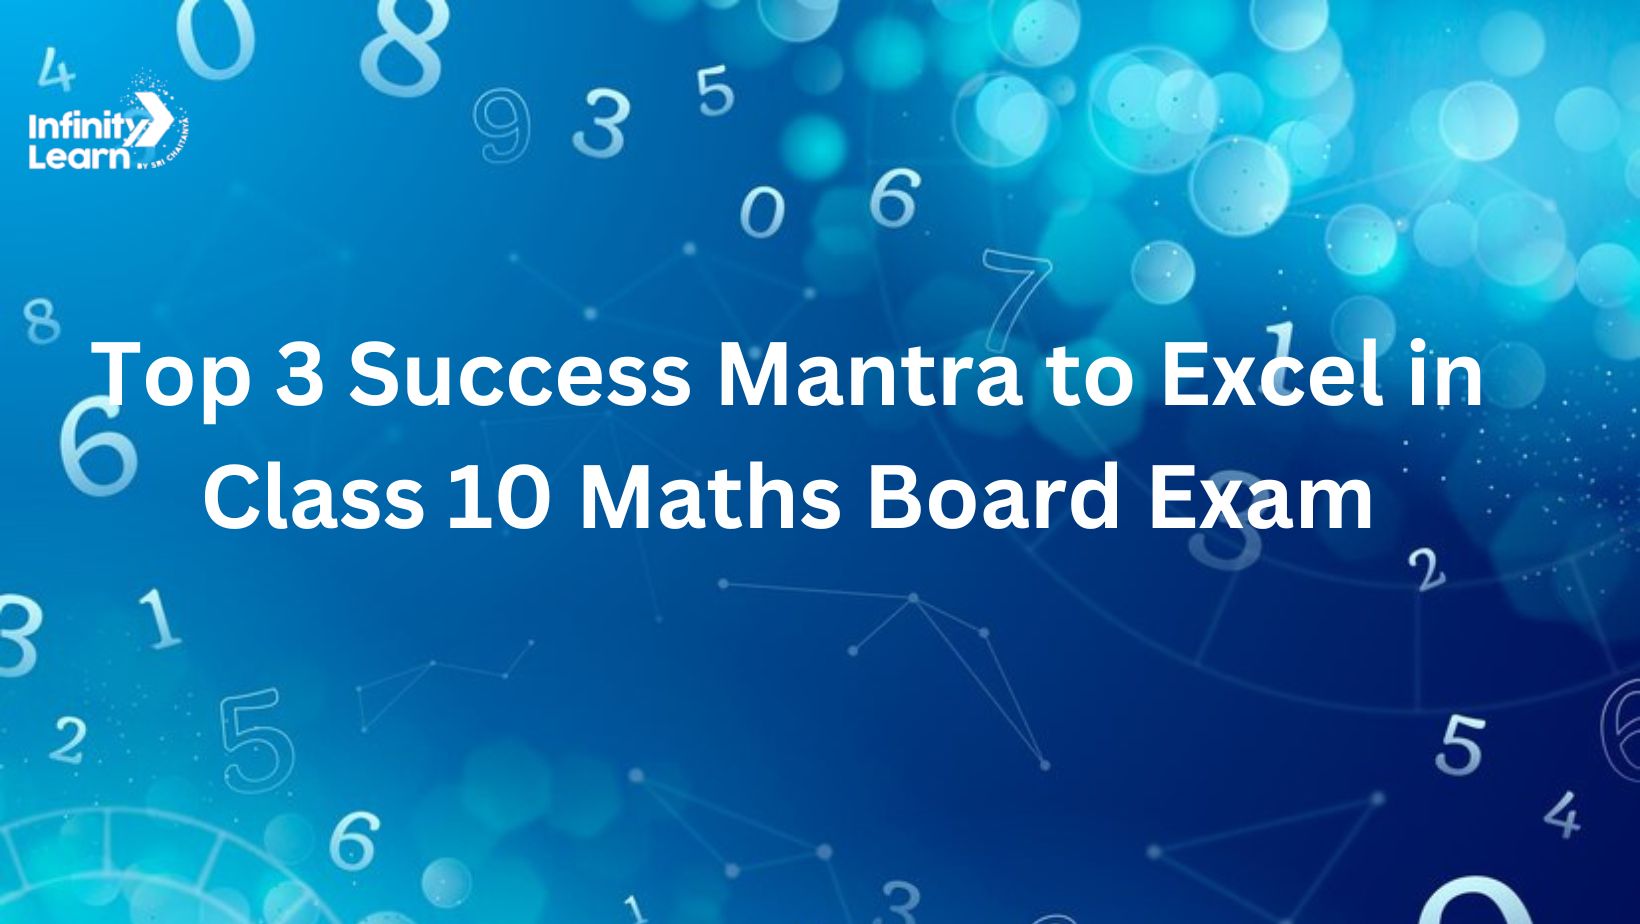 Top 3 Success Mantra to Excel in Class 10 Maths Board Exam